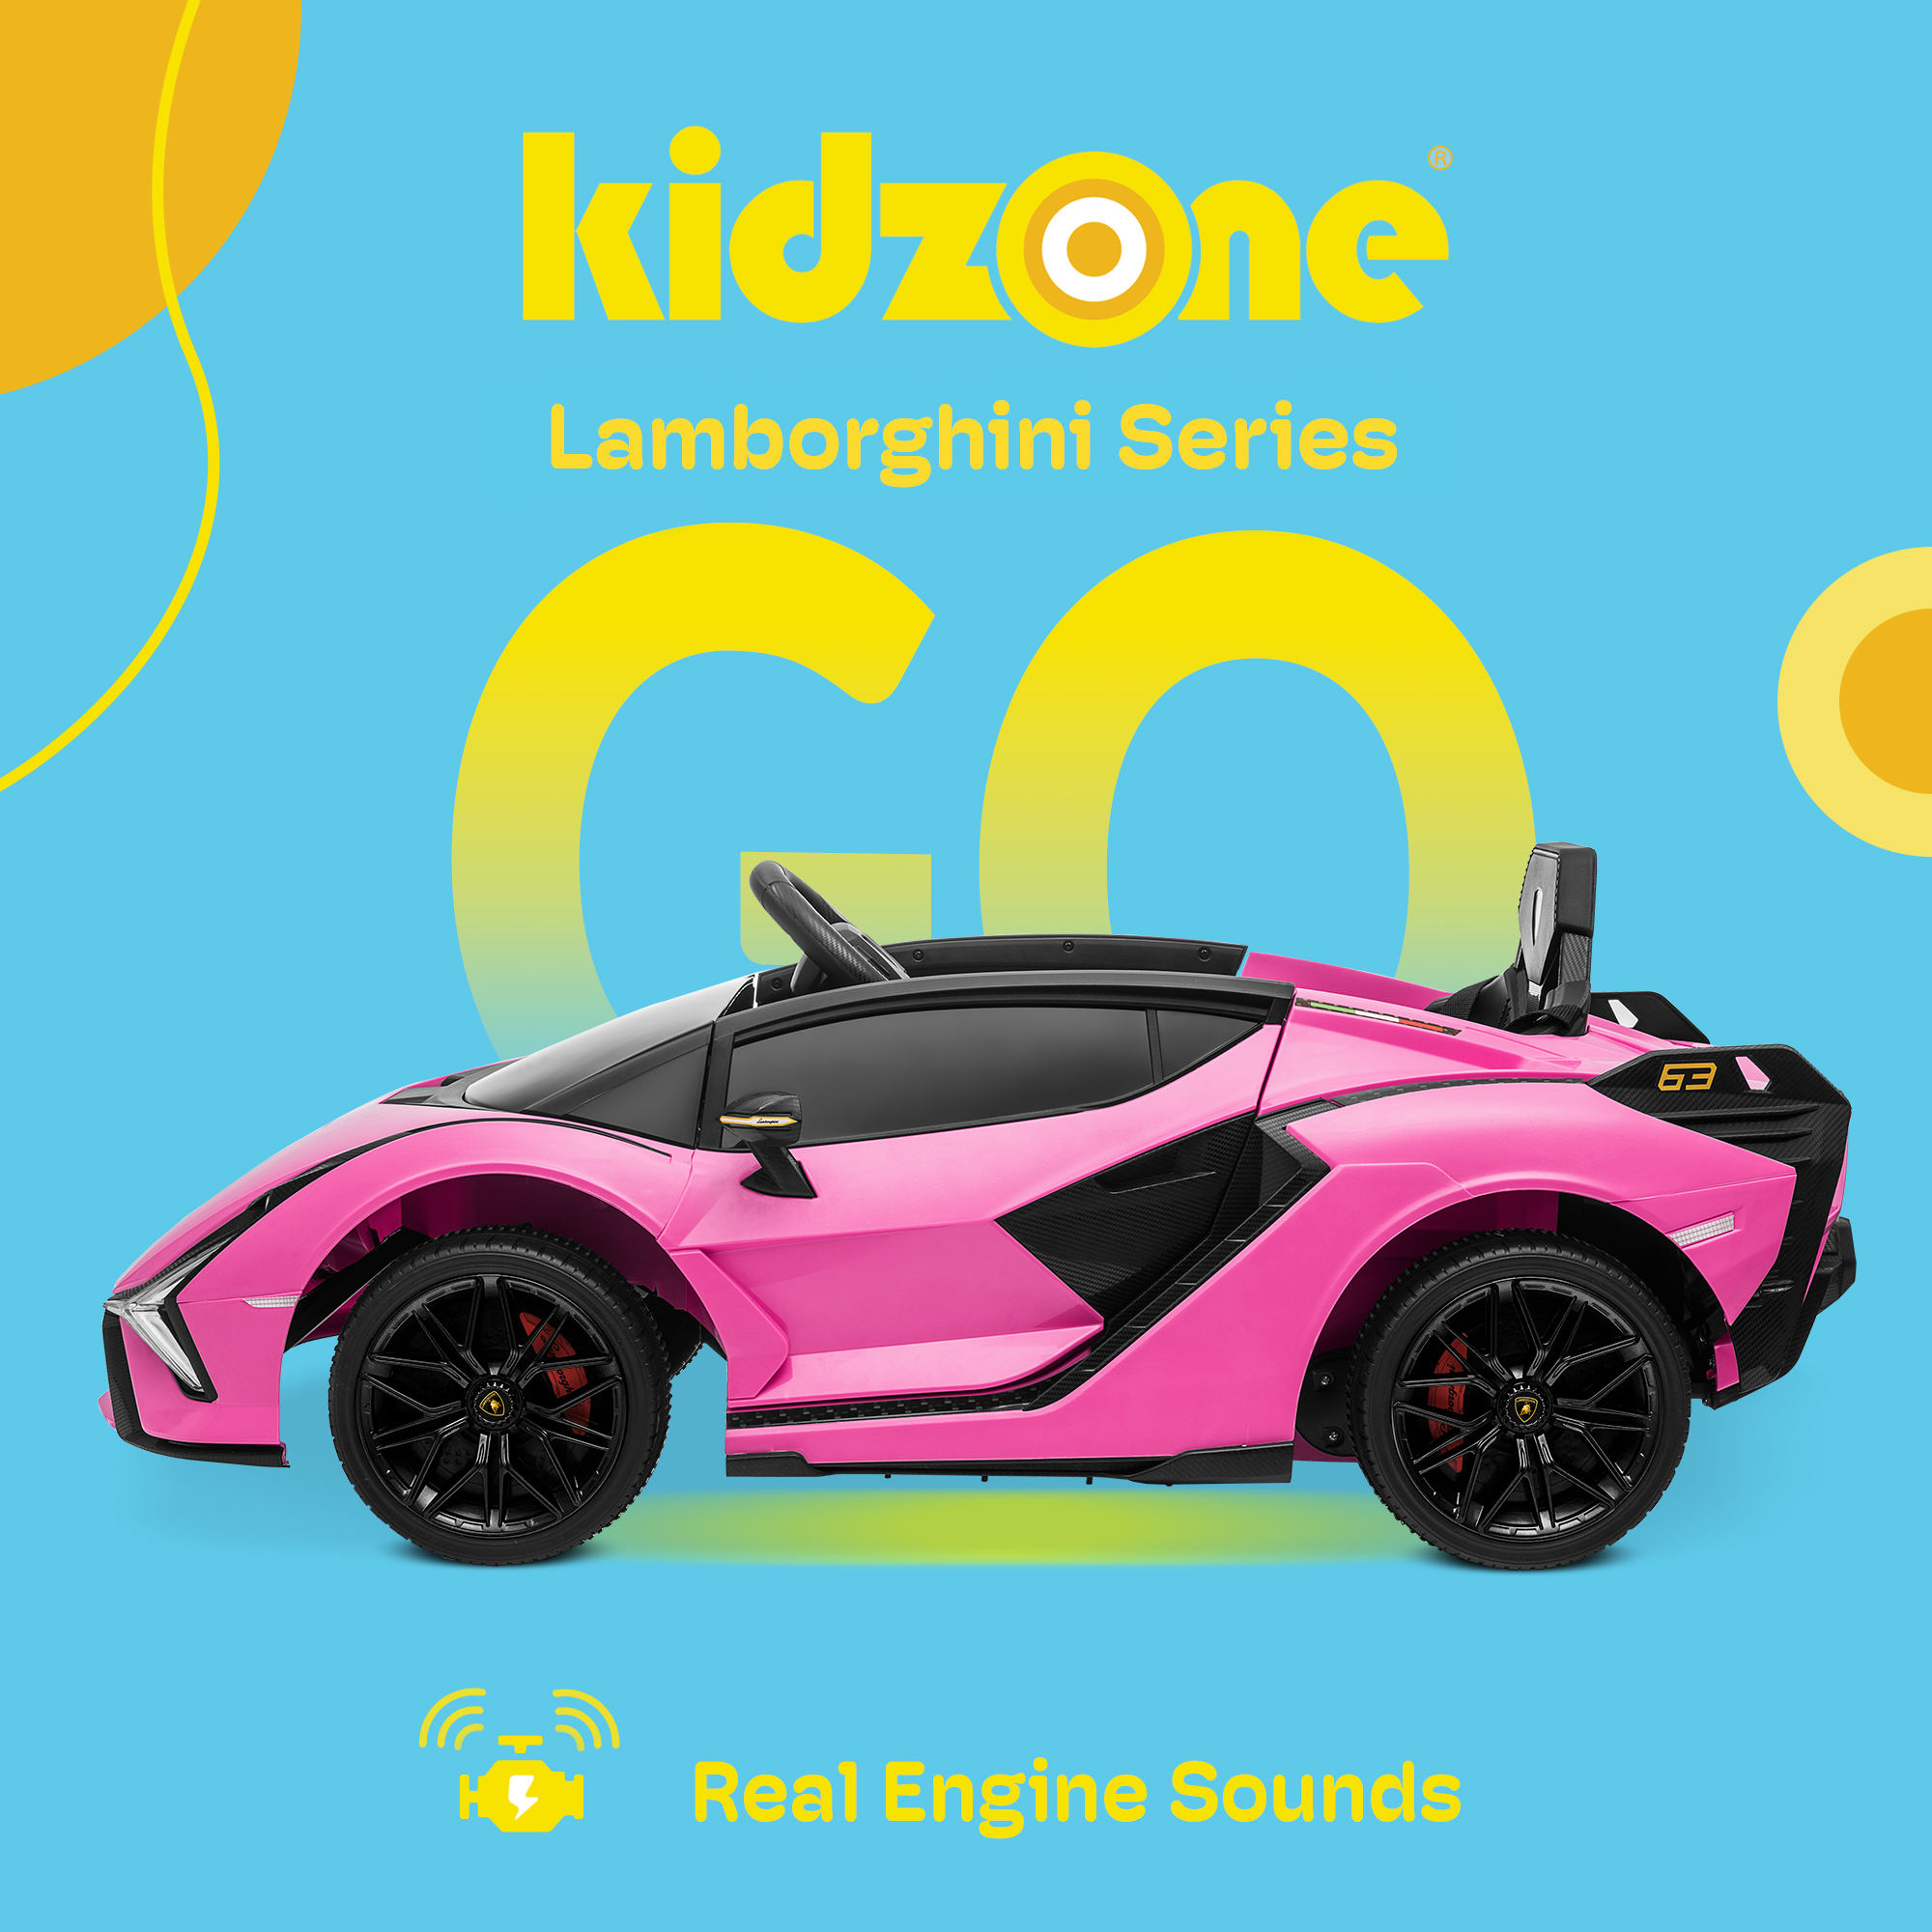 Kidzone Kids 12V Electric Ride On Licensed Lamborghini Sian Roadster Motorized Sport Vehicle With 2 Speed, Remote Control, Wheels Suspension, LED lights, USB/Bluetooth Music, Engine Sounds, Pink - image 2 of 6